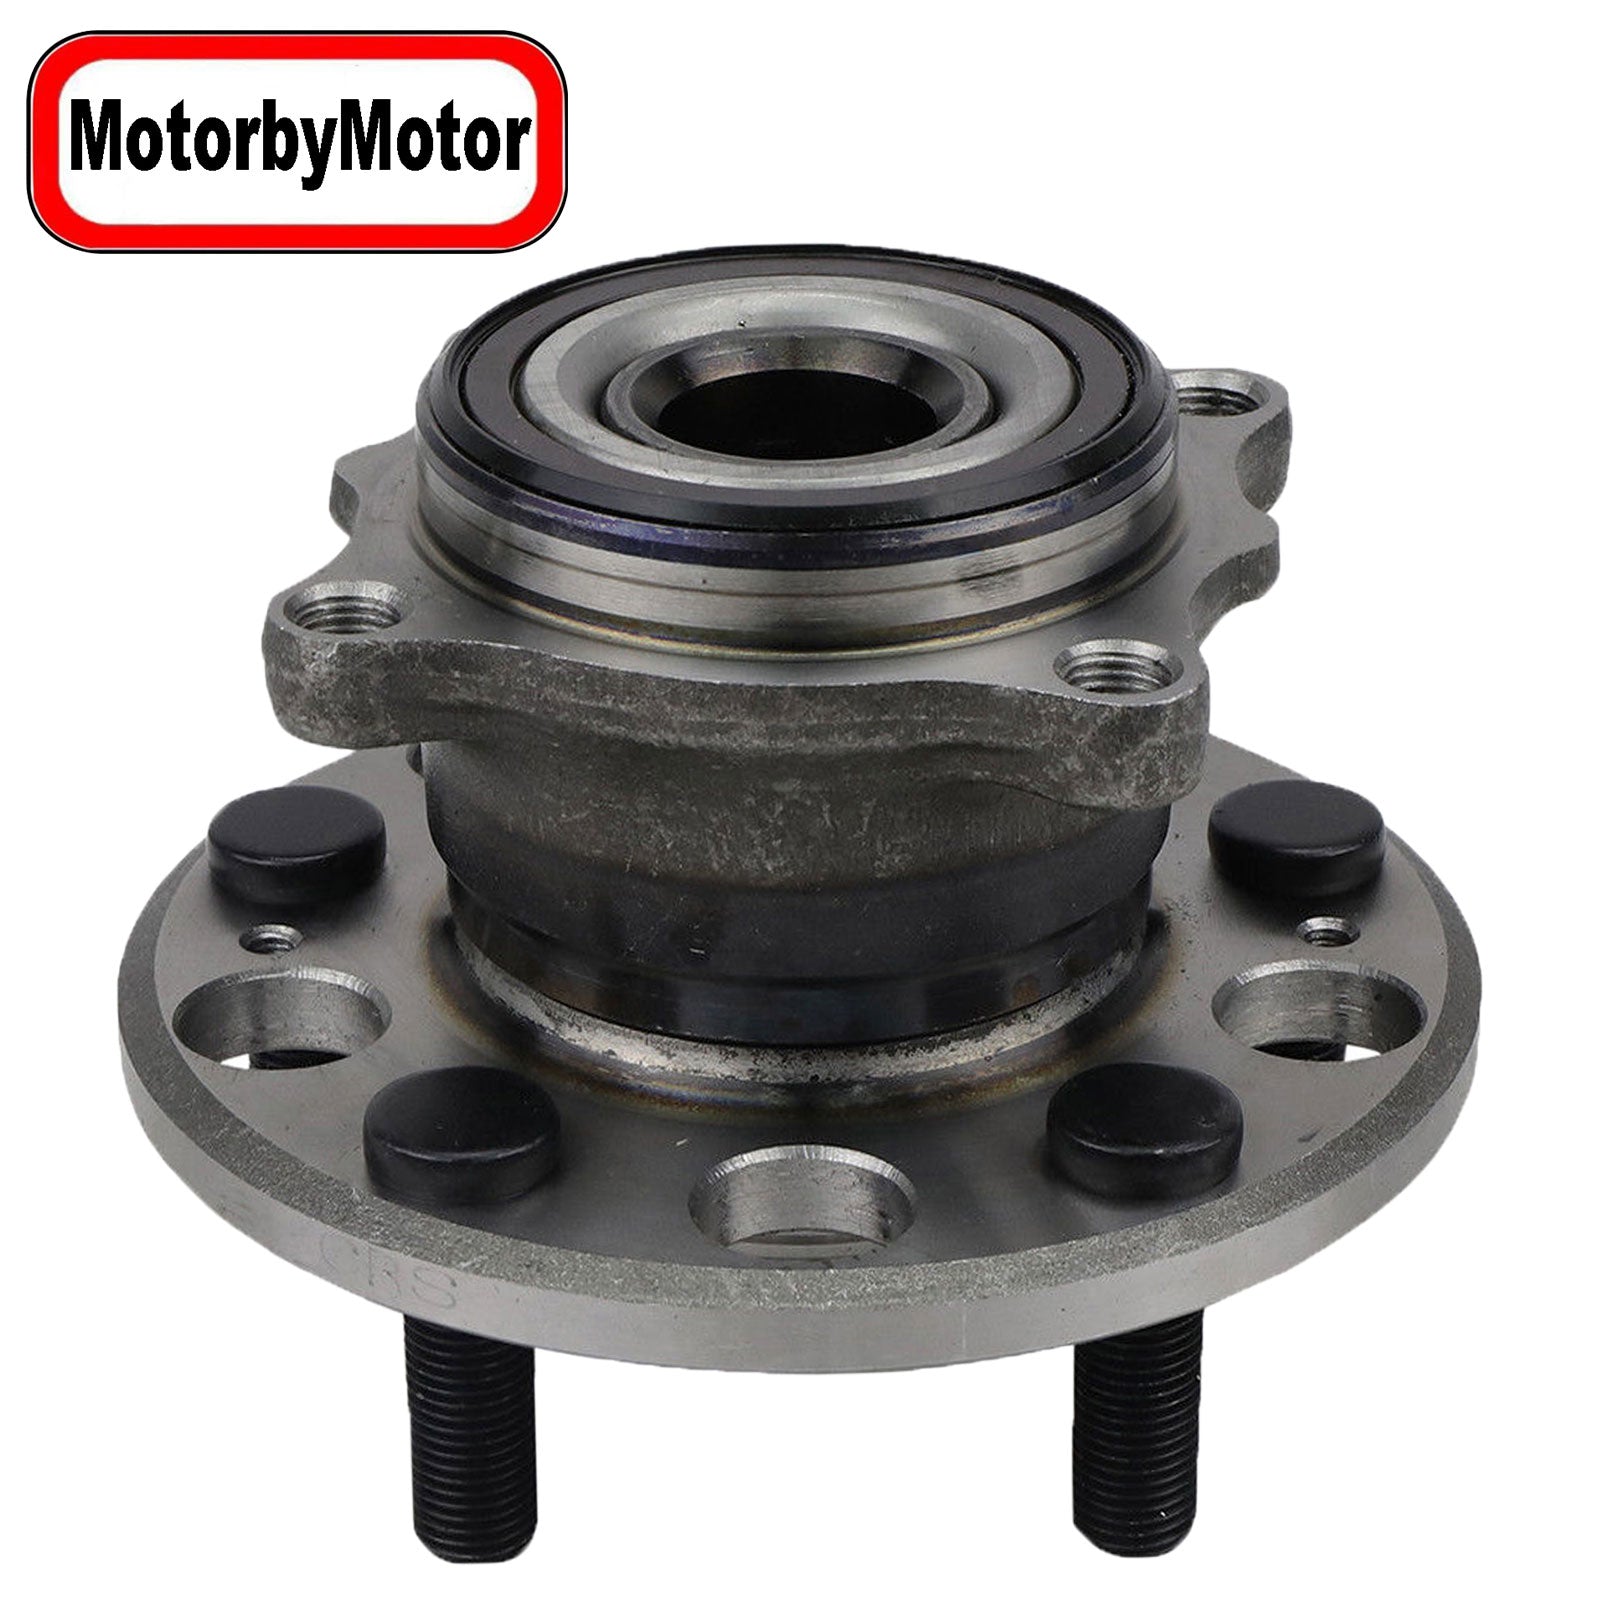 MotorbyMotor 512321 Rear Wheel Bearing & Hub Assembly with 5 Lugs,2005-2012 Acura RL,2009-2013 Acura TL Low-Runout OE Directly Replacement (w/ABS, AWD) MotorbyMotor